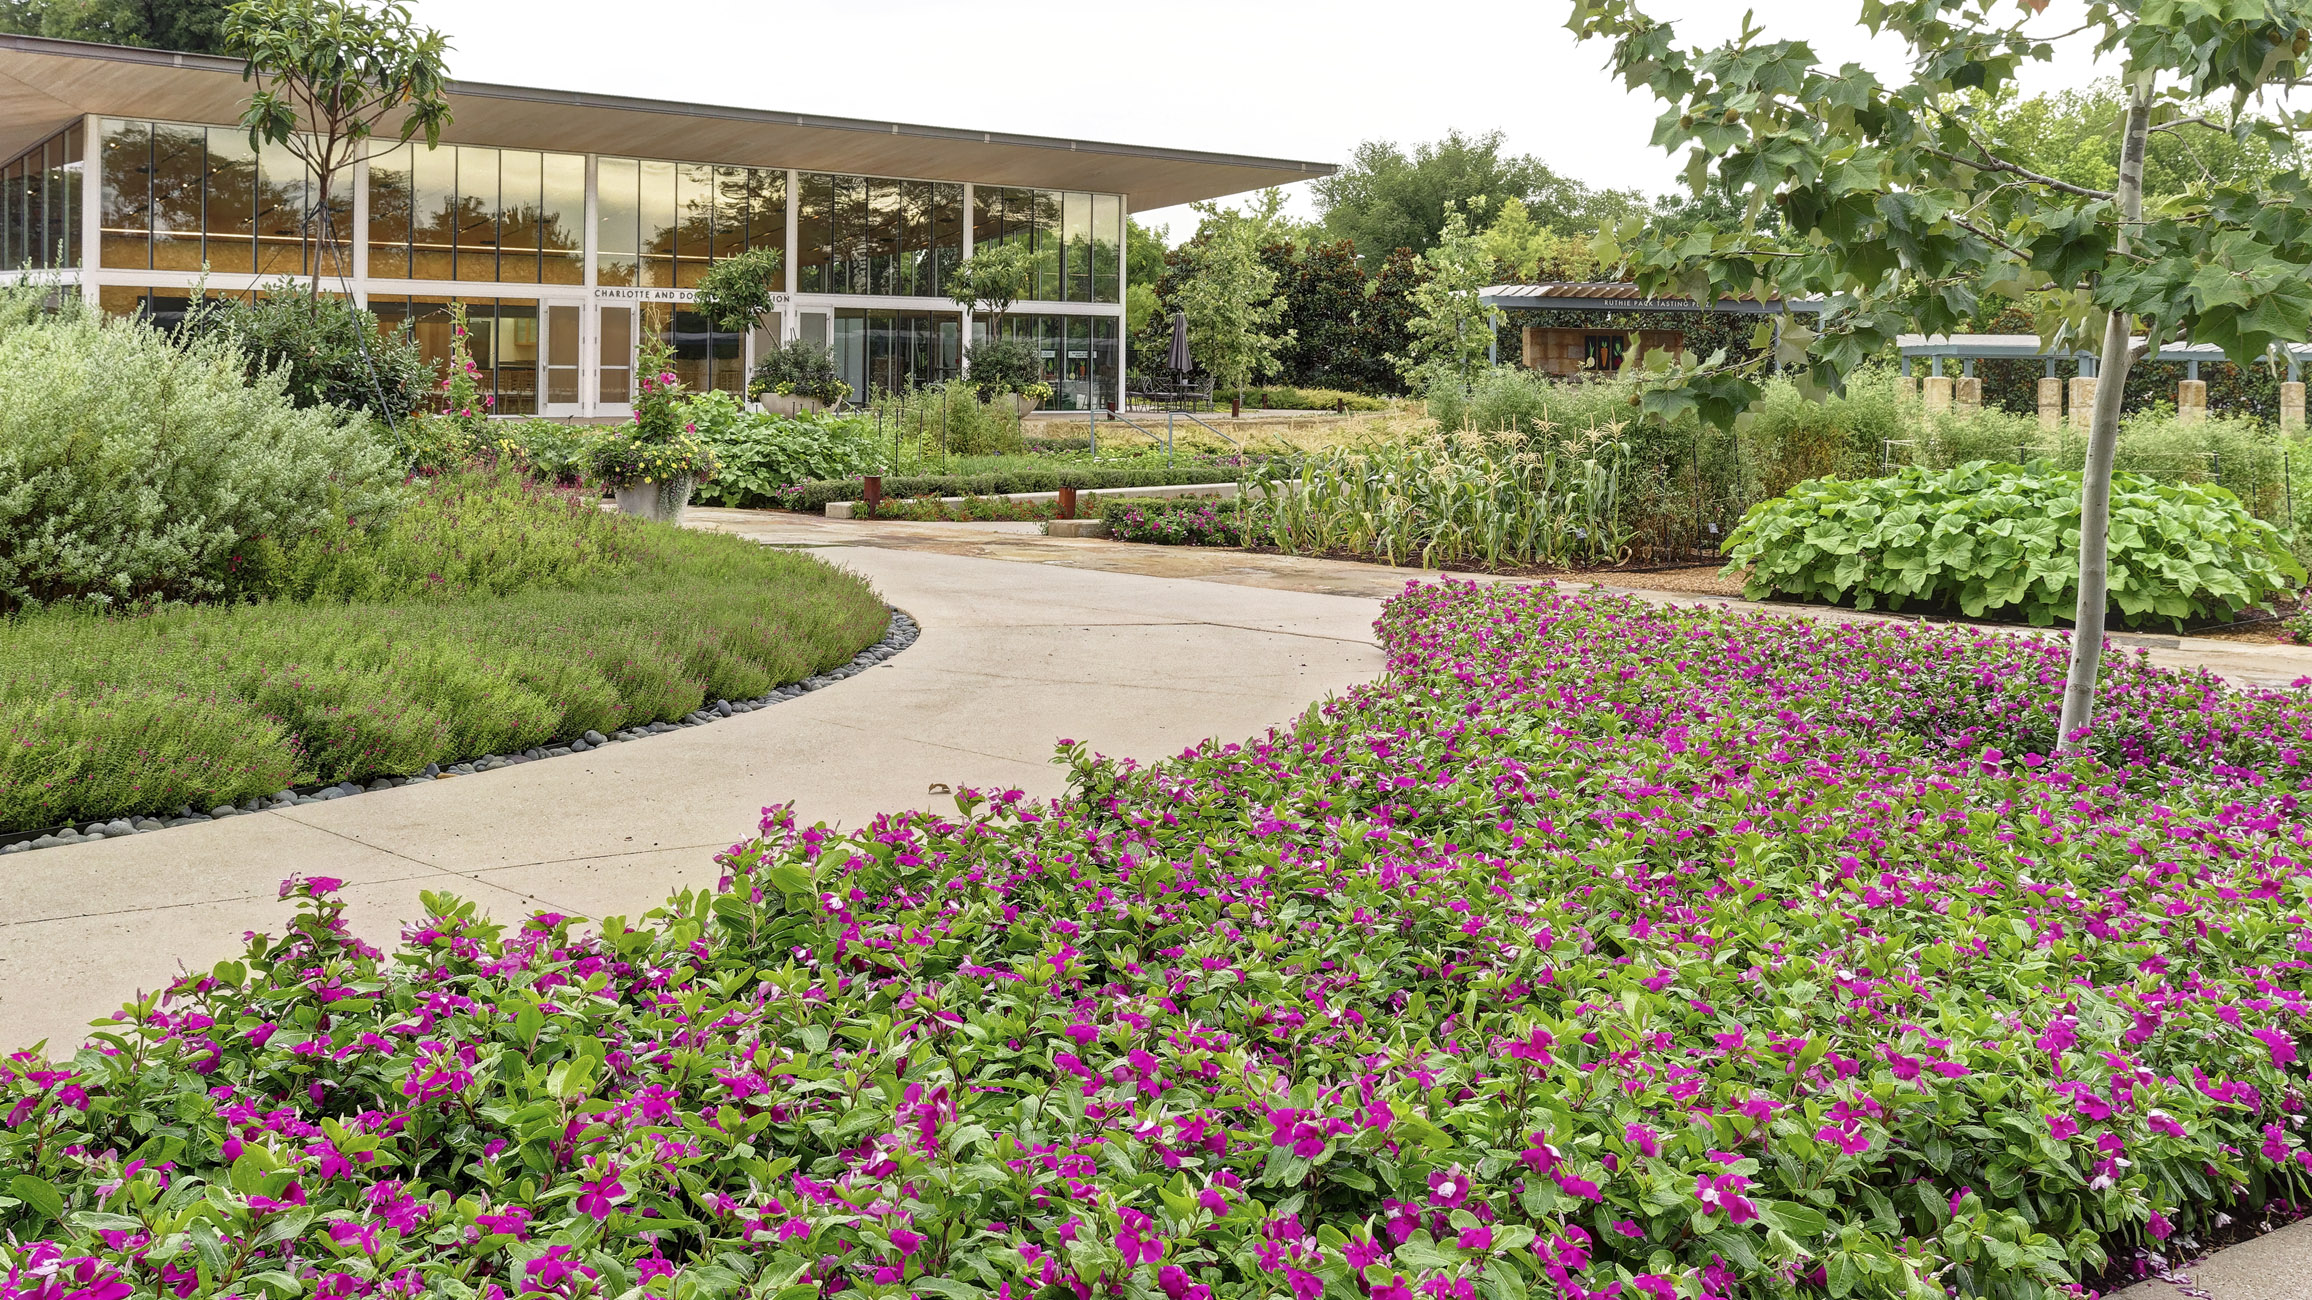 Choosing a Commercial Landscaping Provider for the Upcoming Year - Some Important Considerations